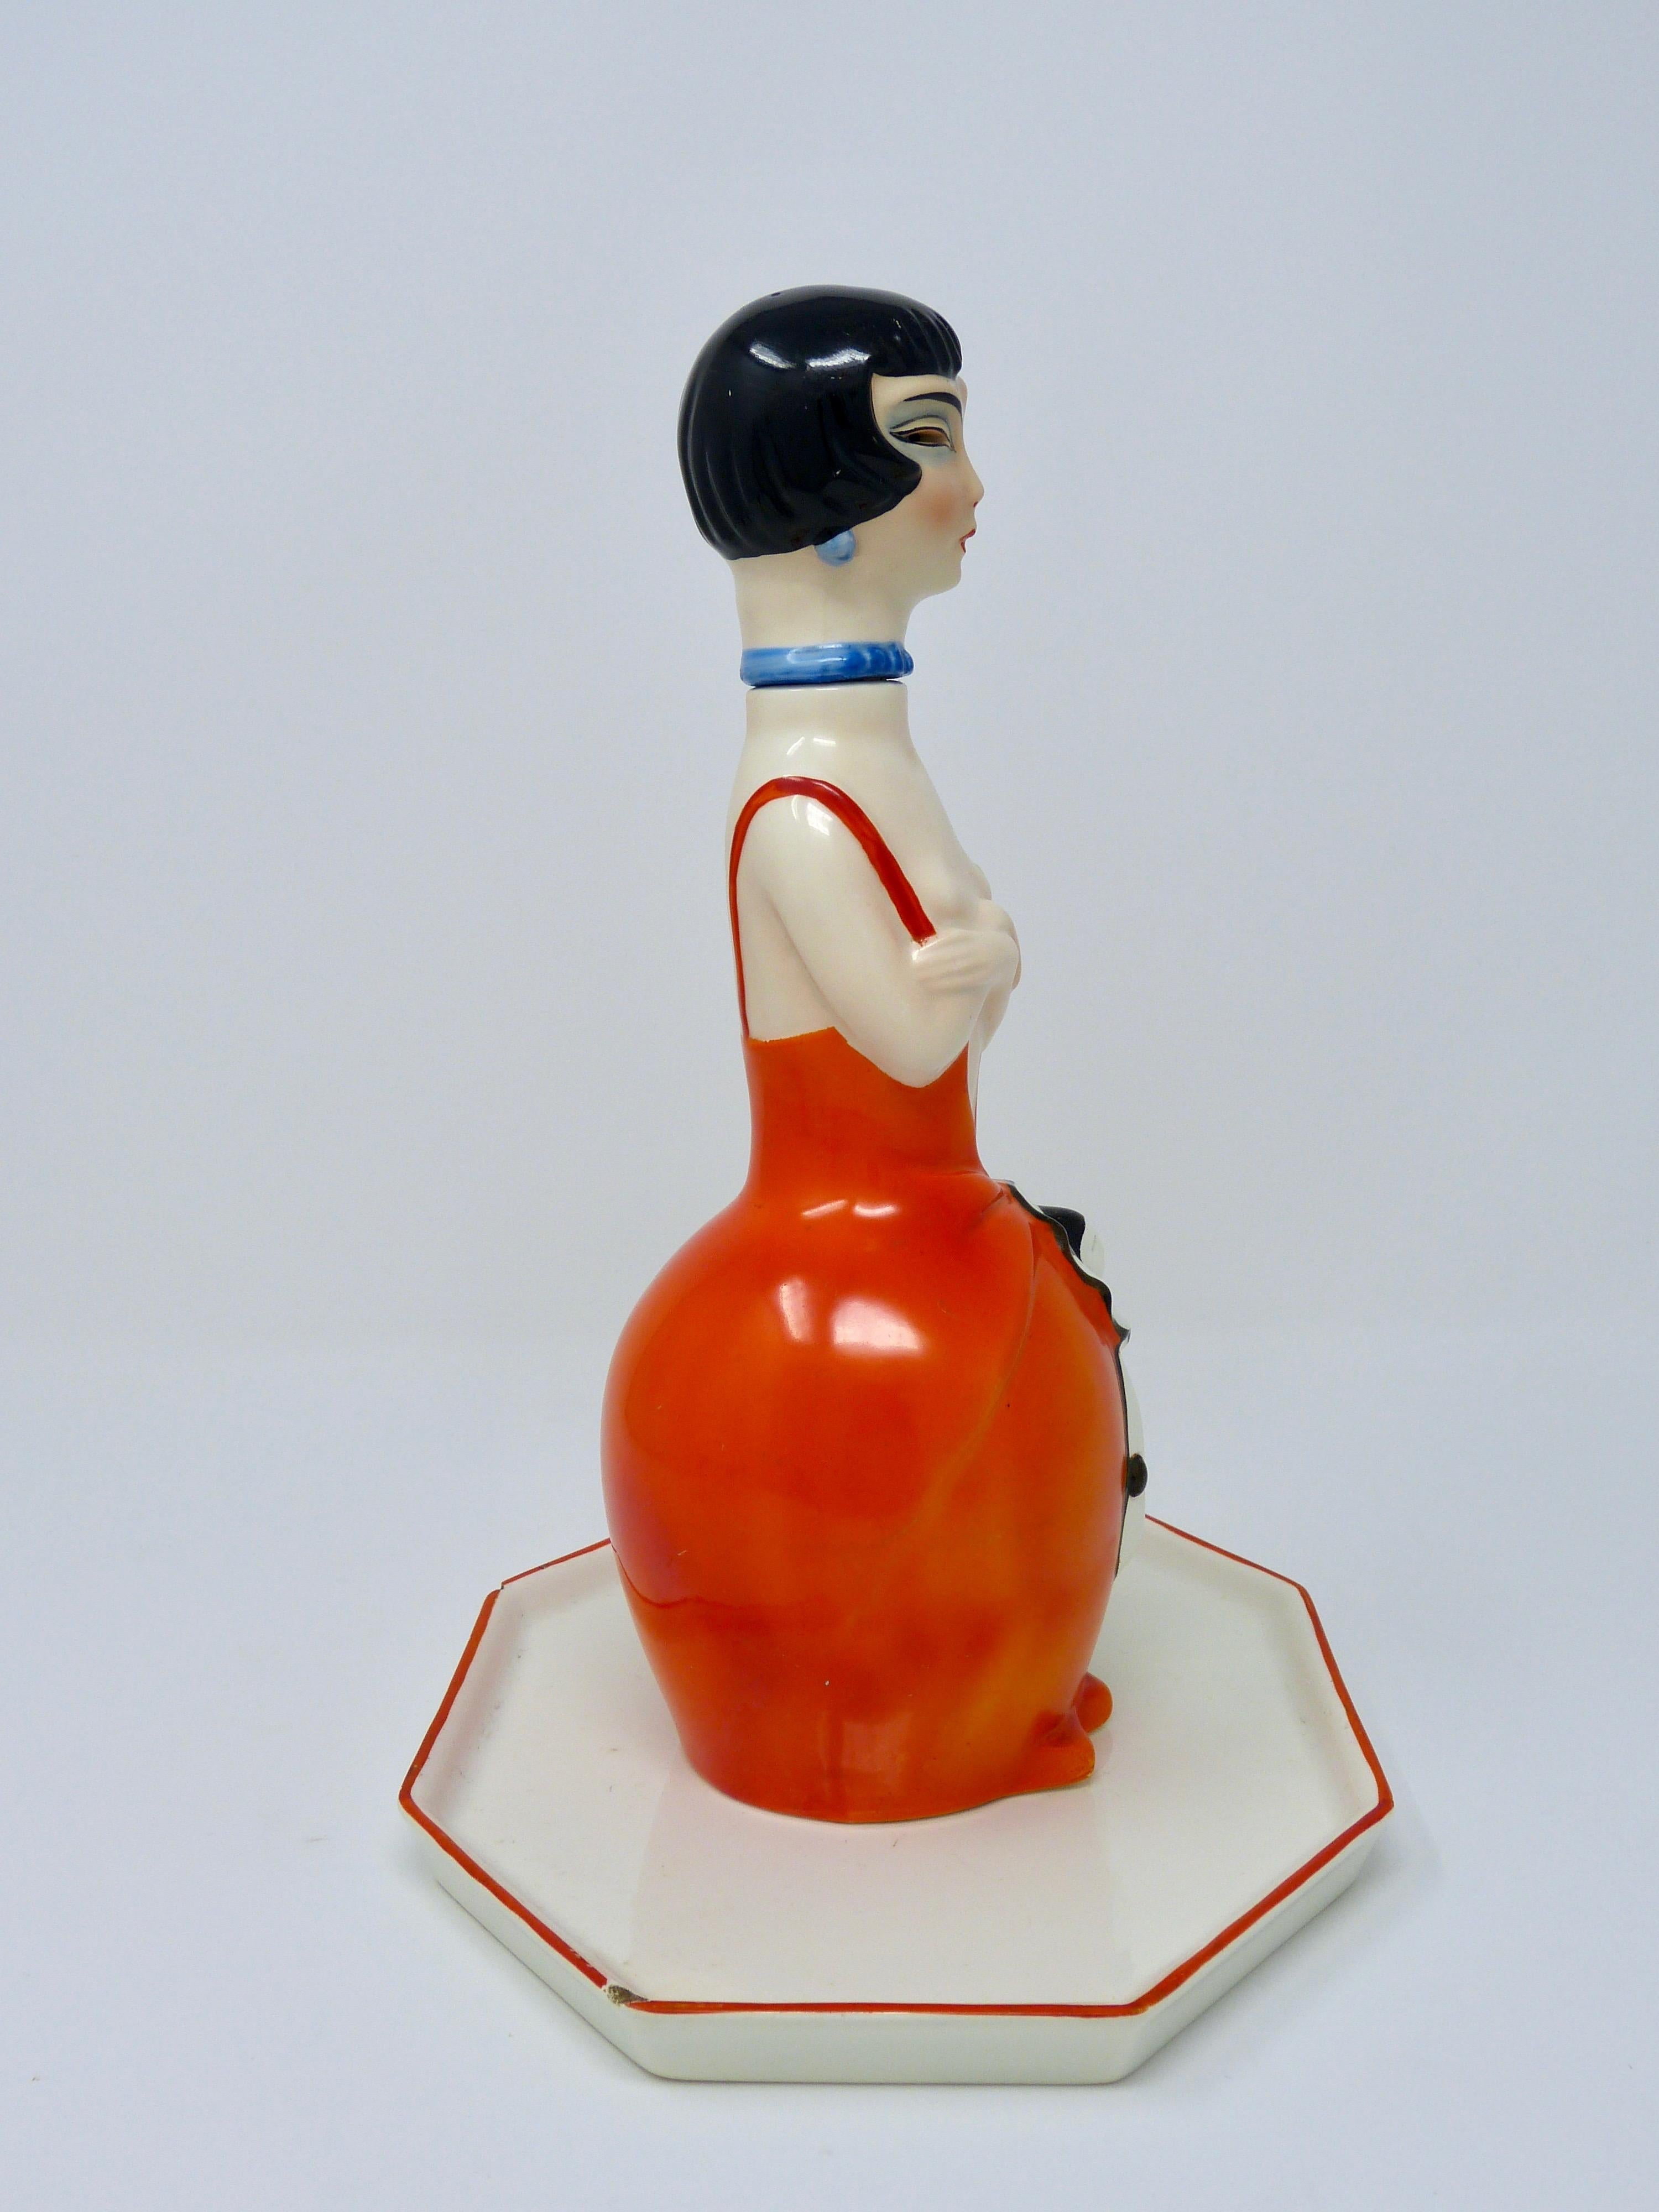 Art Deco Goebel lady decanter
Made of porcelain
Germany, circa 1930
Comes with original tray and two cups